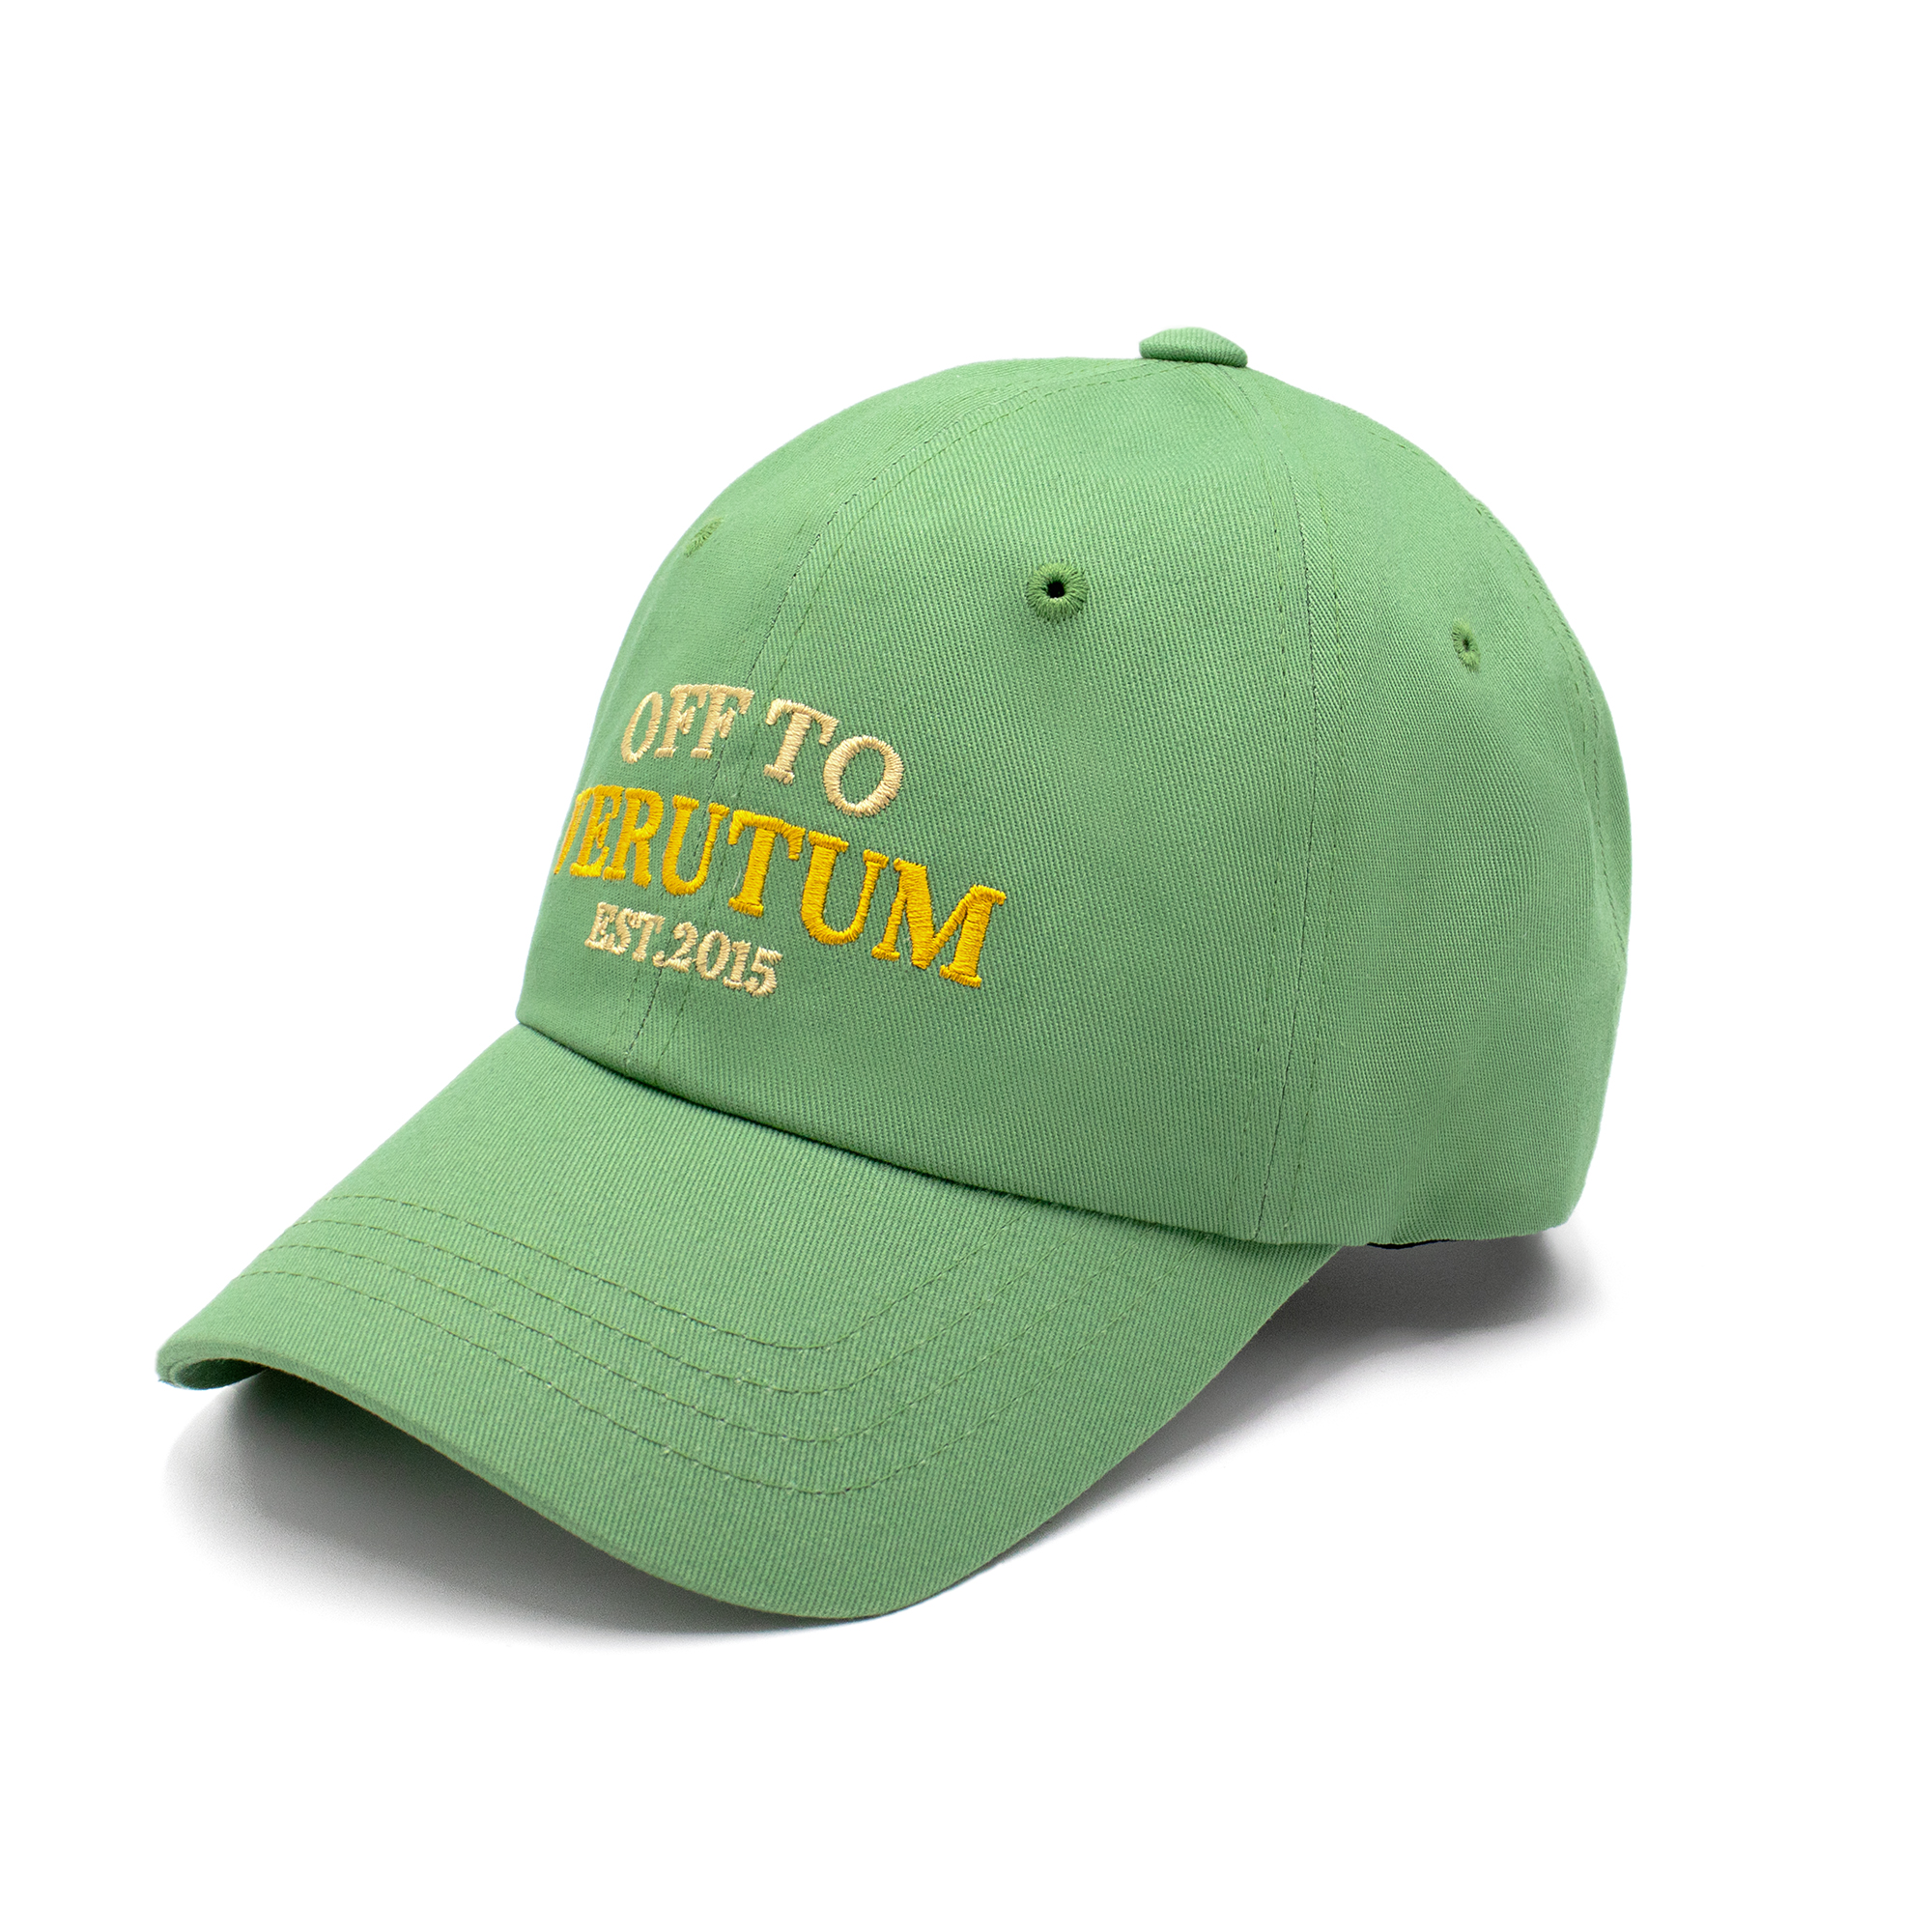 HW-BC144 : New Font Off To VERUTUM Ball Cap│Green